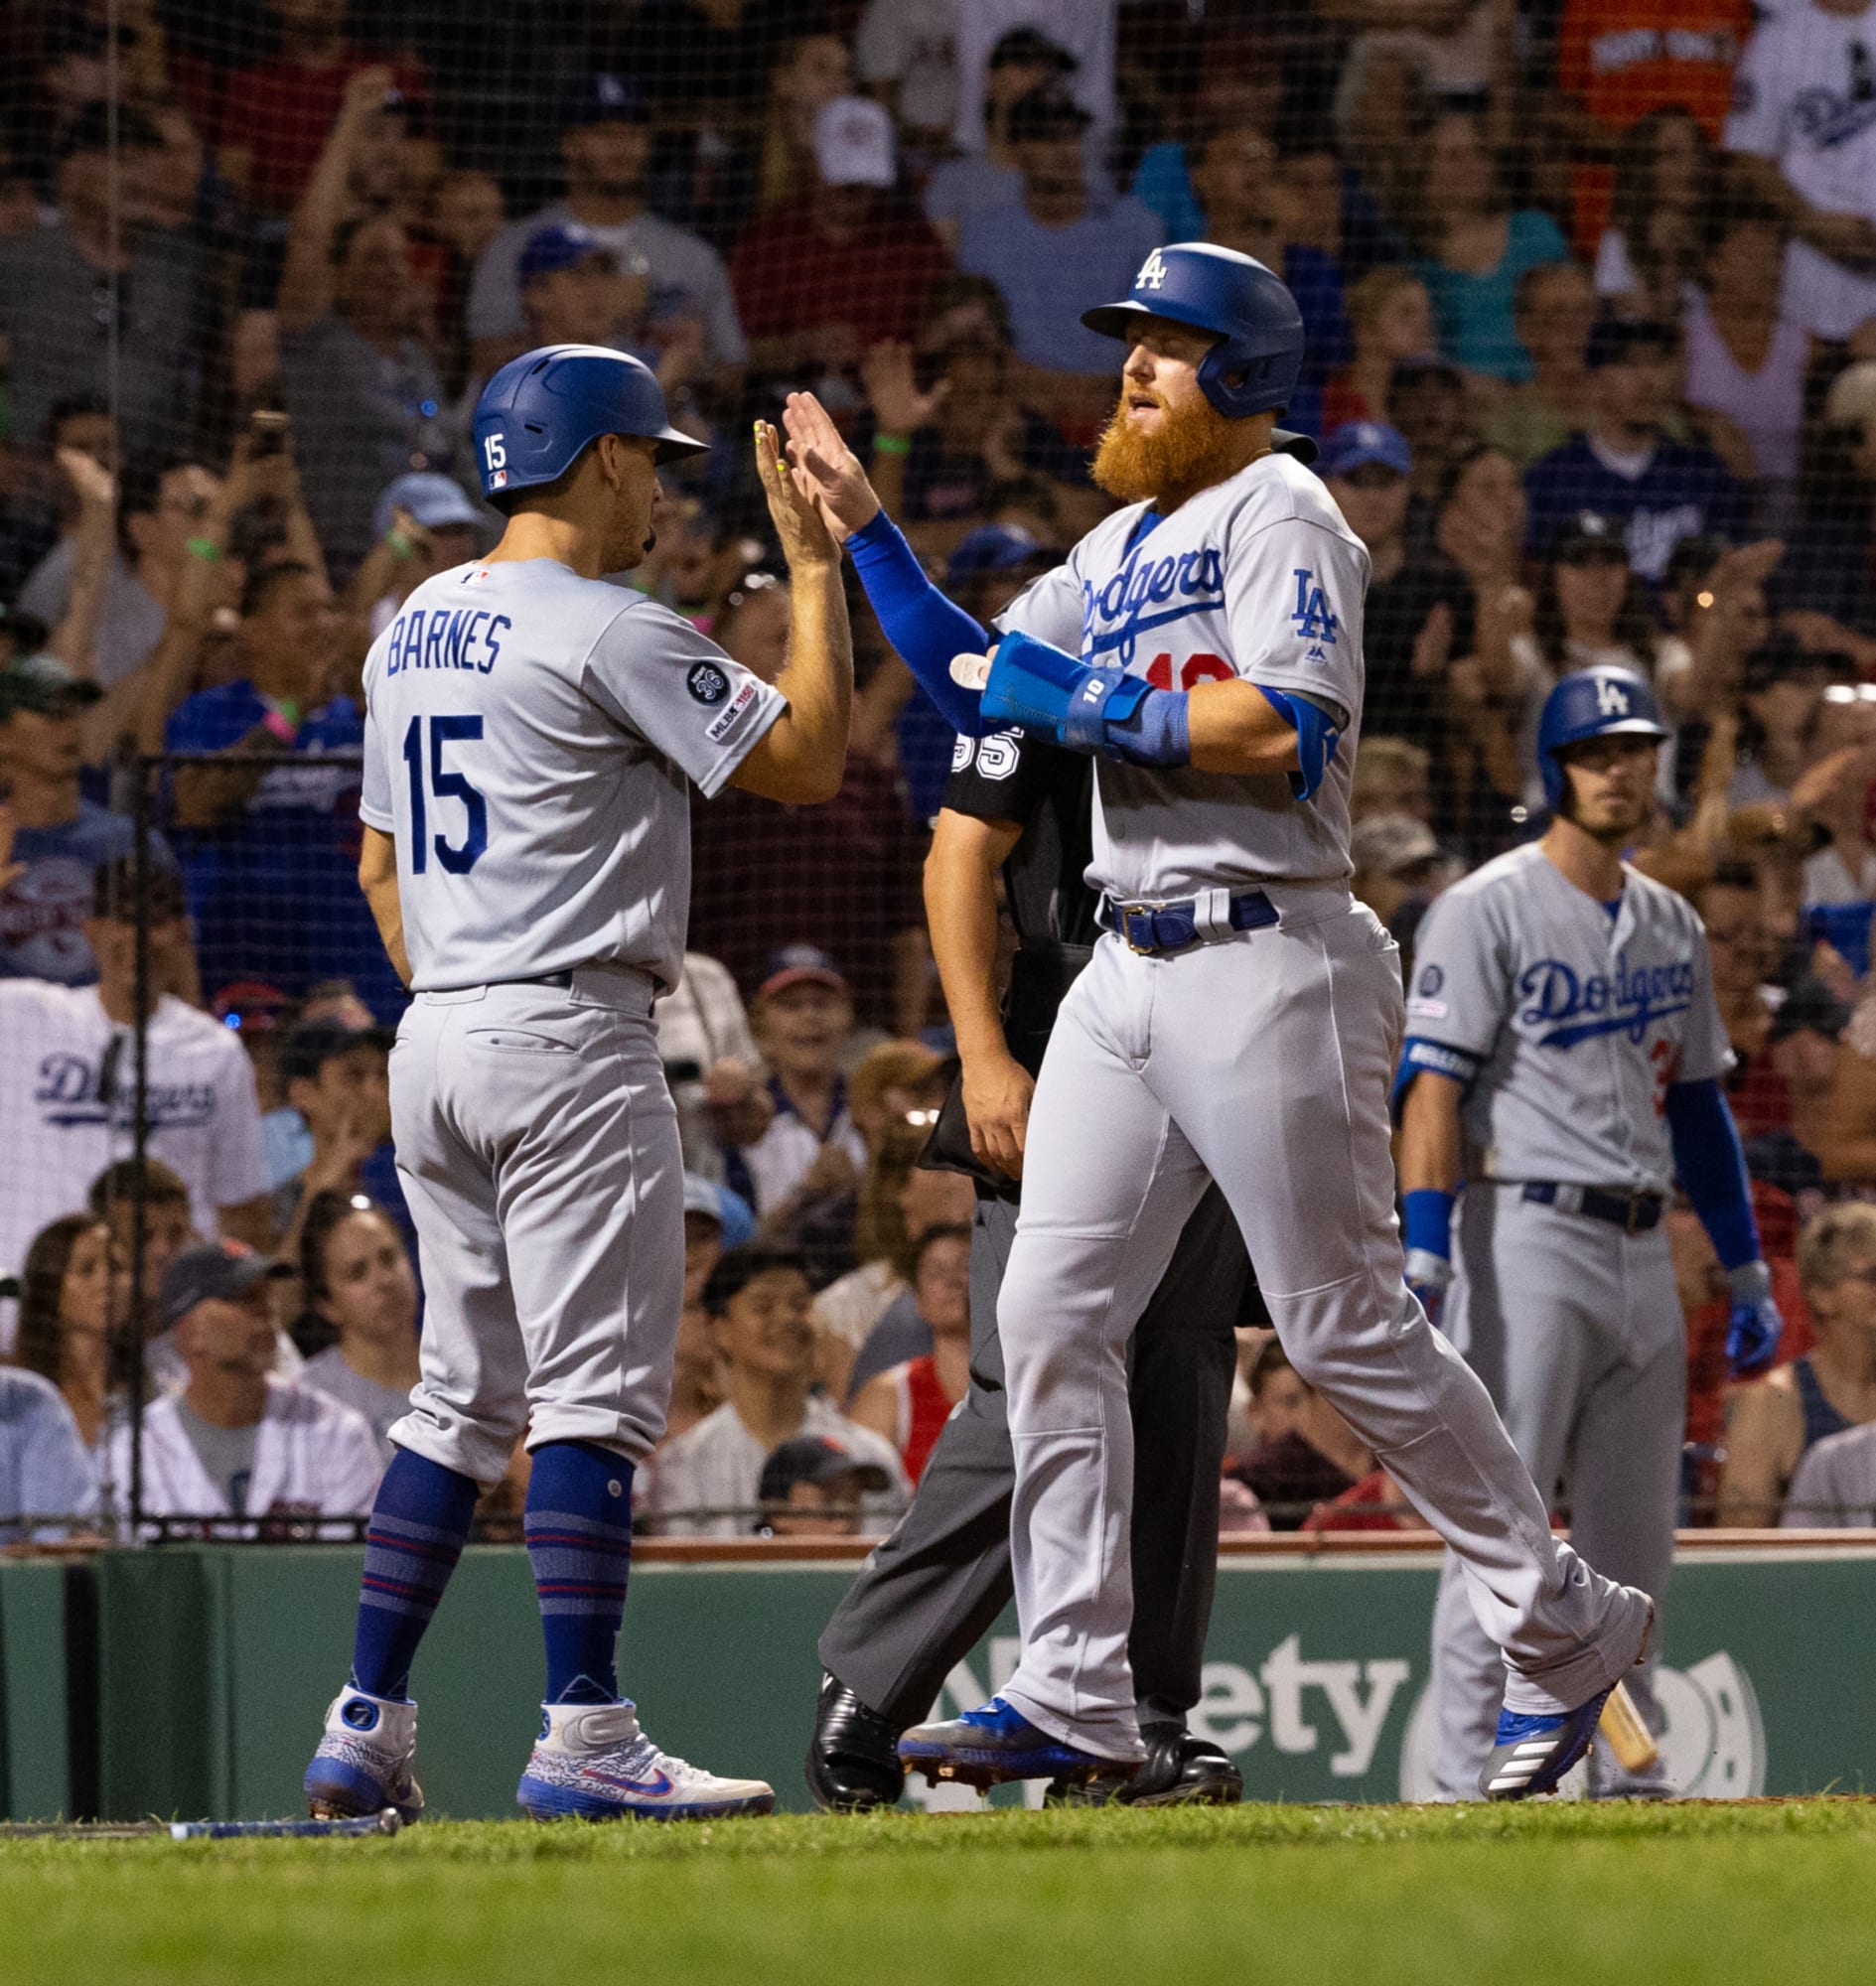 Los Angeles Dodgers Looking to take two of three at Fenway